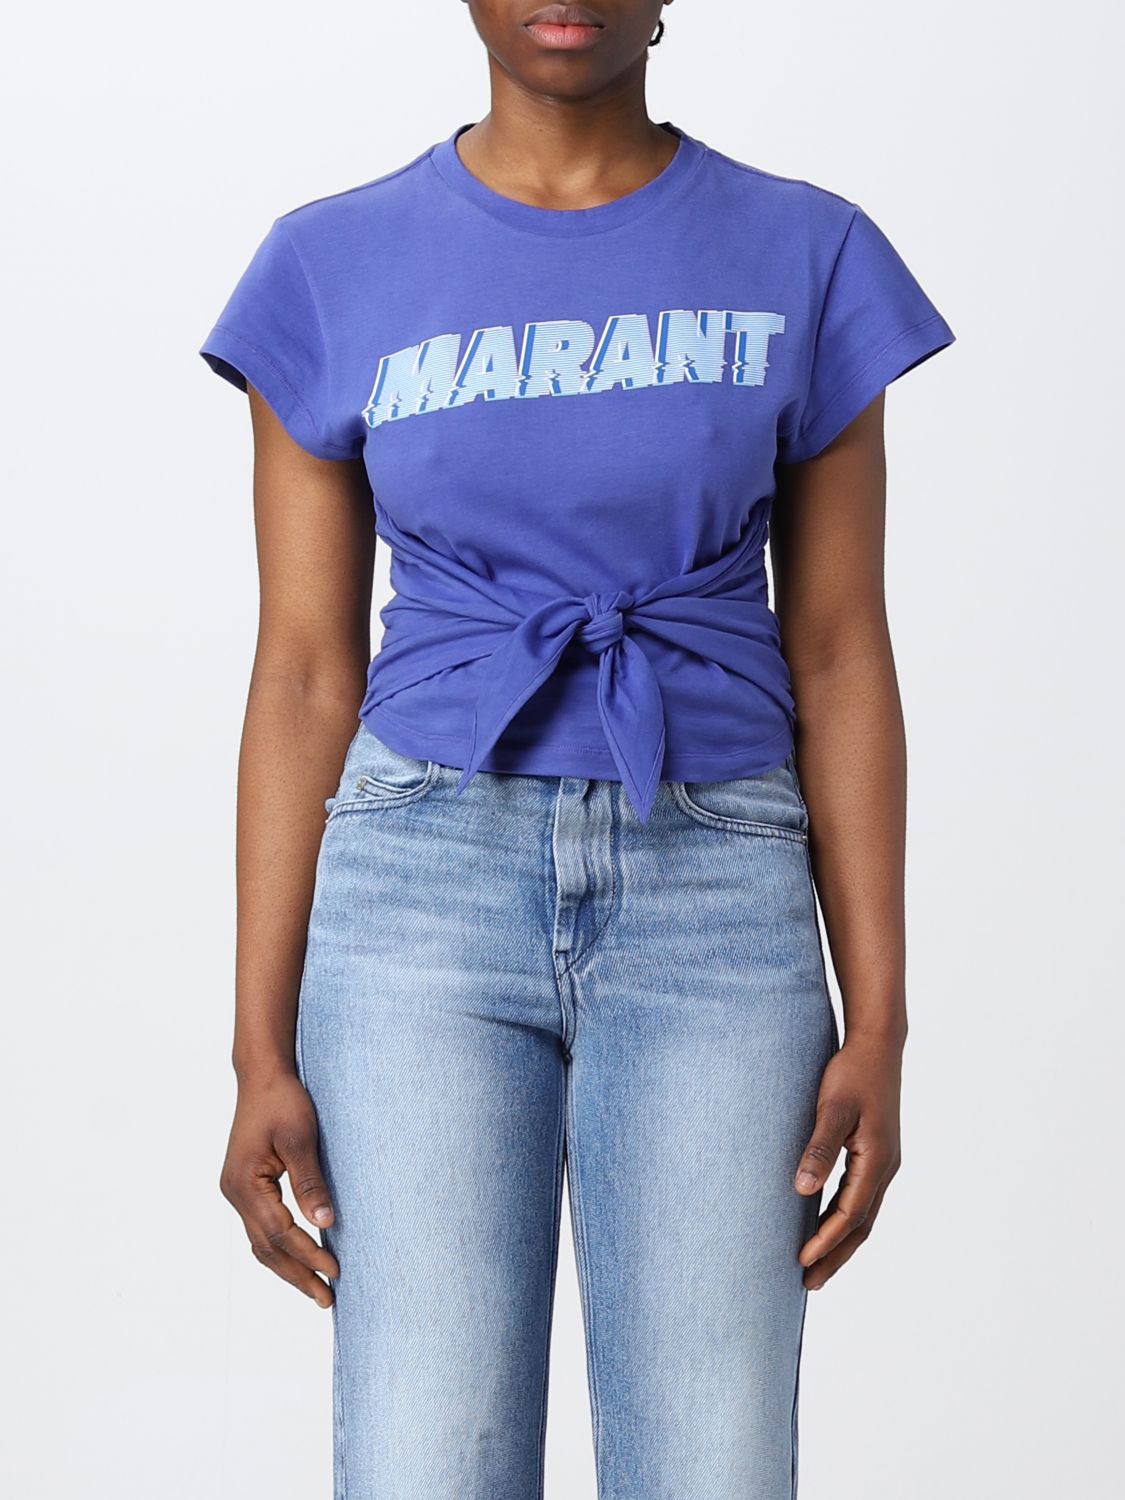 Meetbaar Station Extreme armoede ISABEL MARANT ETOILE: t-shirt for woman - Electric Blue | Isabel Marant  Etoile t-shirt TS0033FAA1N91E online on GIGLIO.COM